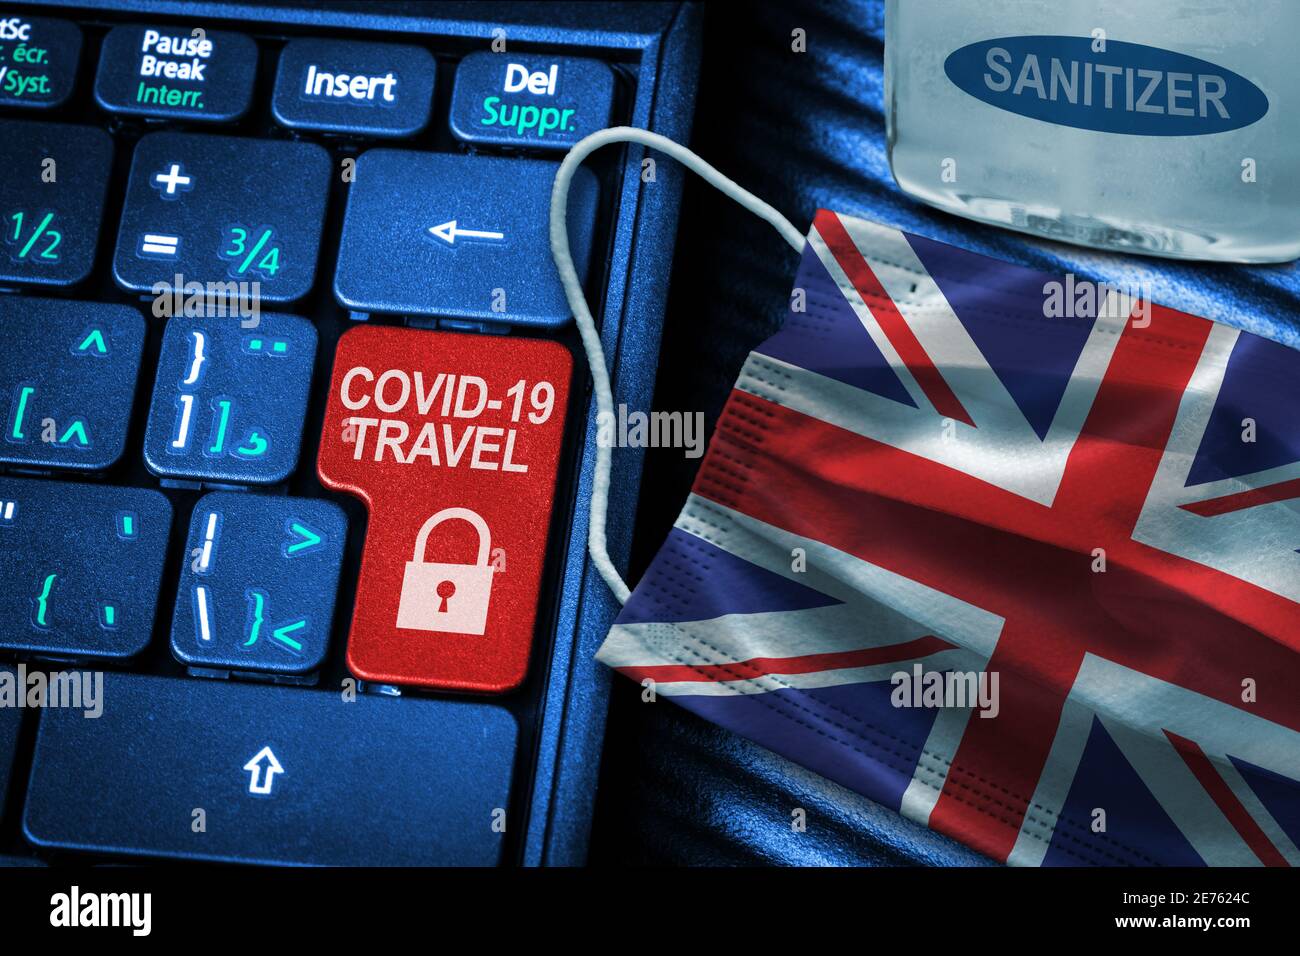 UK COVID-19 coronavirus travel restrictions concept showing red button warning on keyboard with British flag face mask and hand sanitizer. New normal Stock Photo